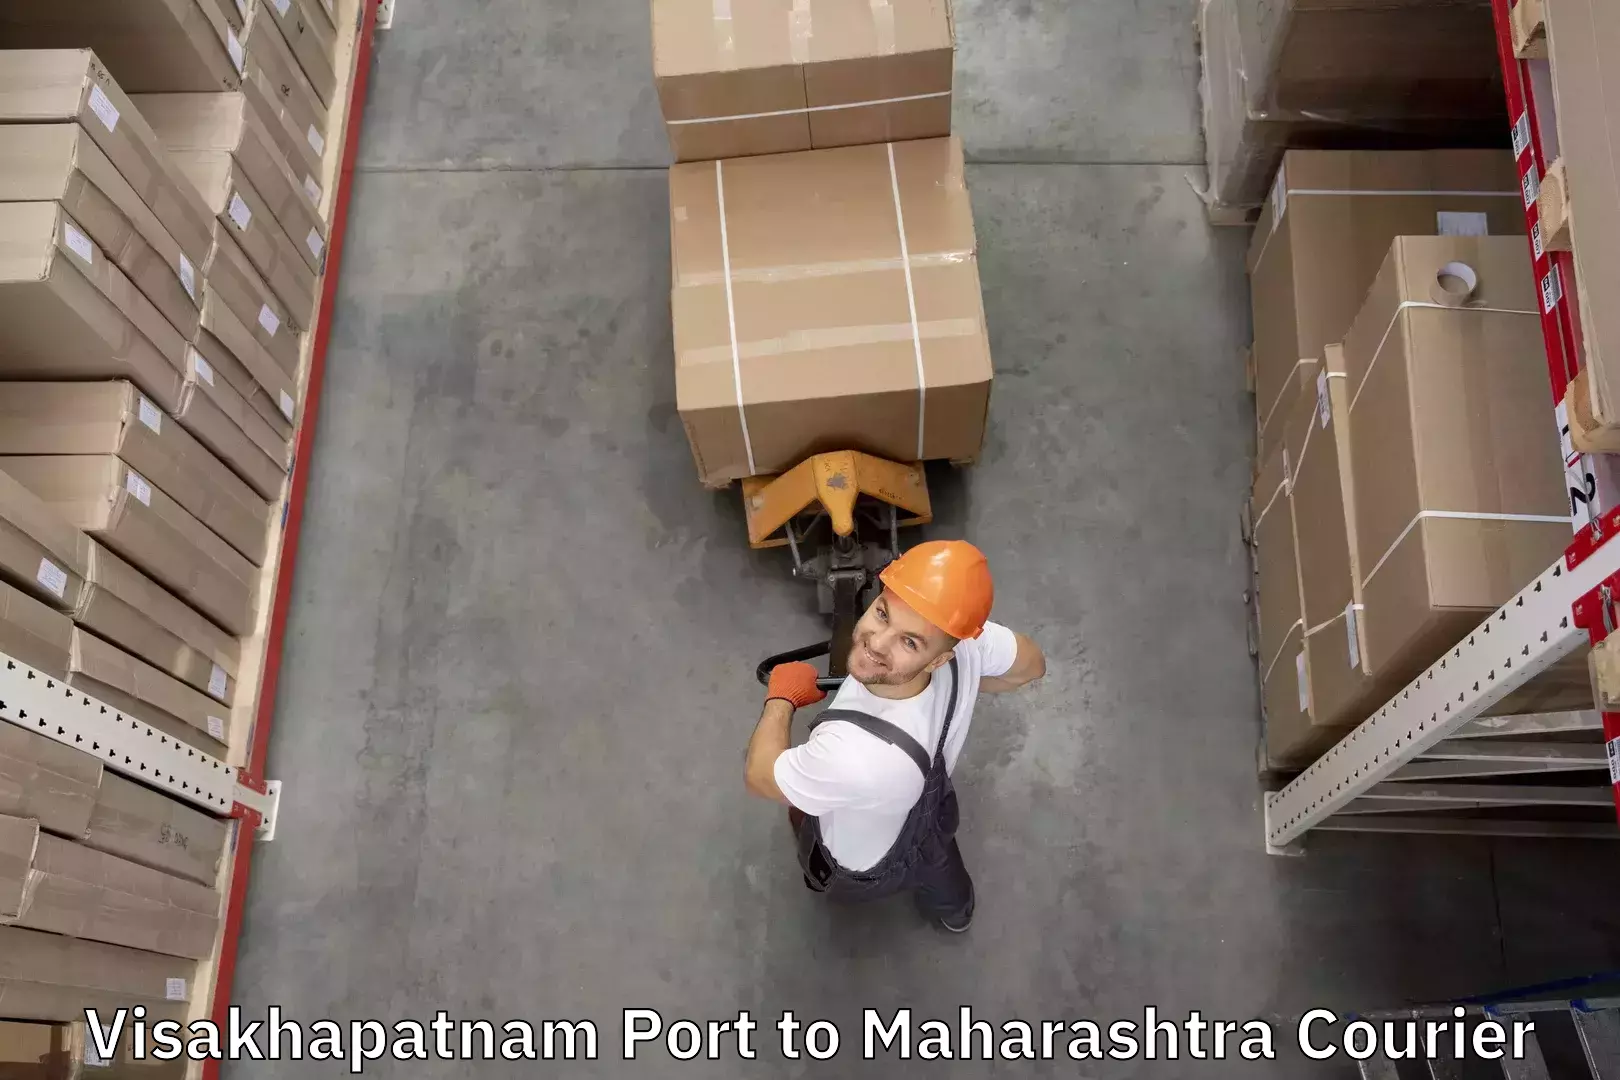 Reliable luggage courier Visakhapatnam Port to Symbiosis International Pune